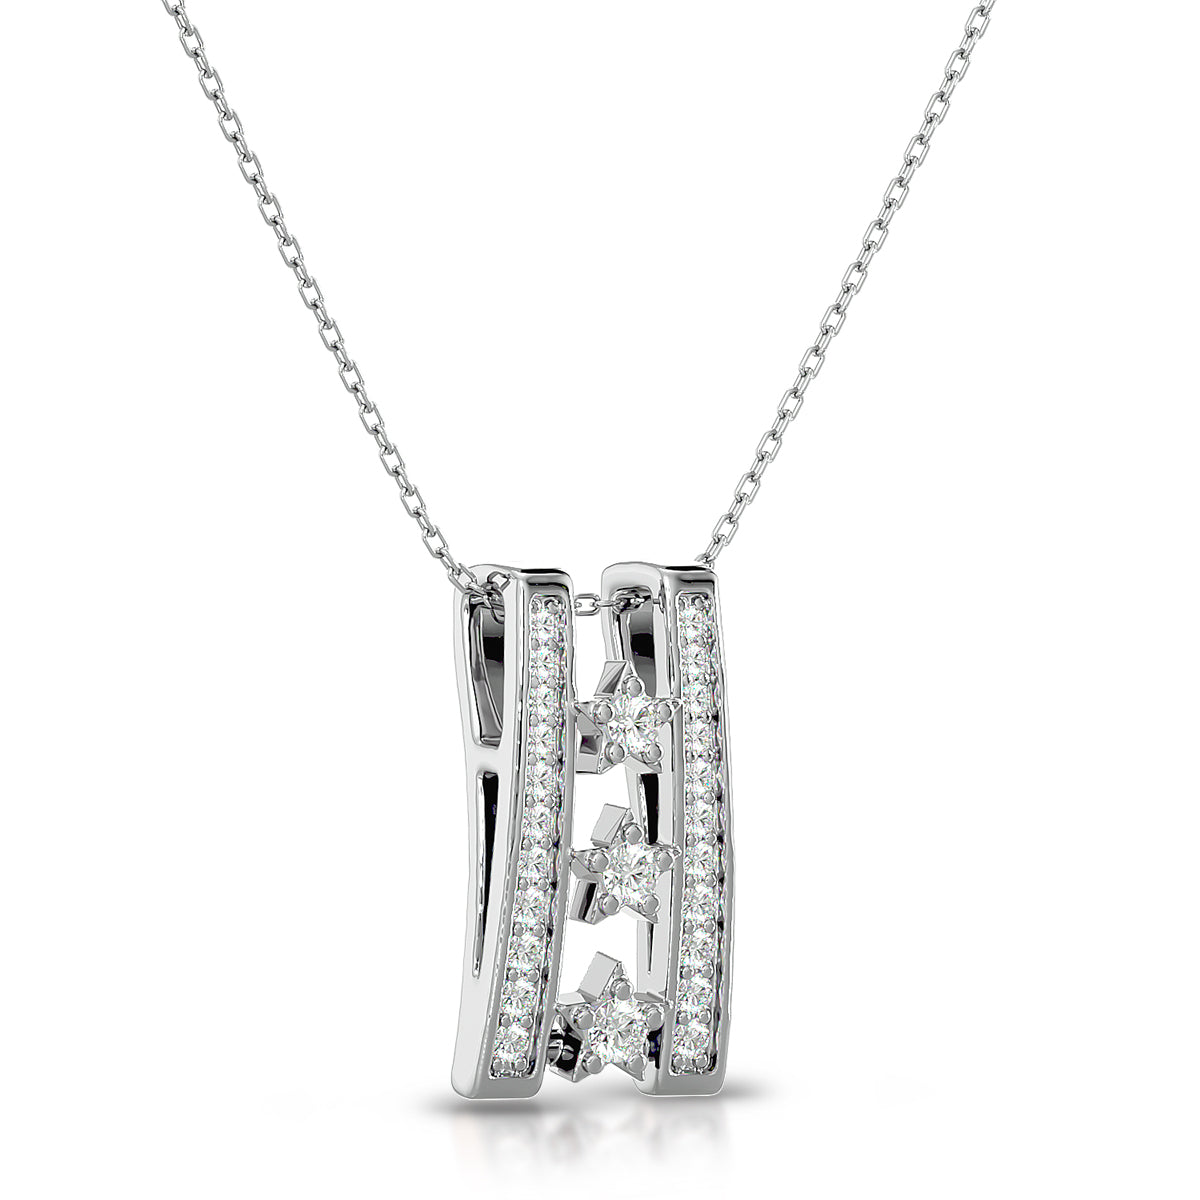 Empowerment Necklace 18K White Gold With Diamonds